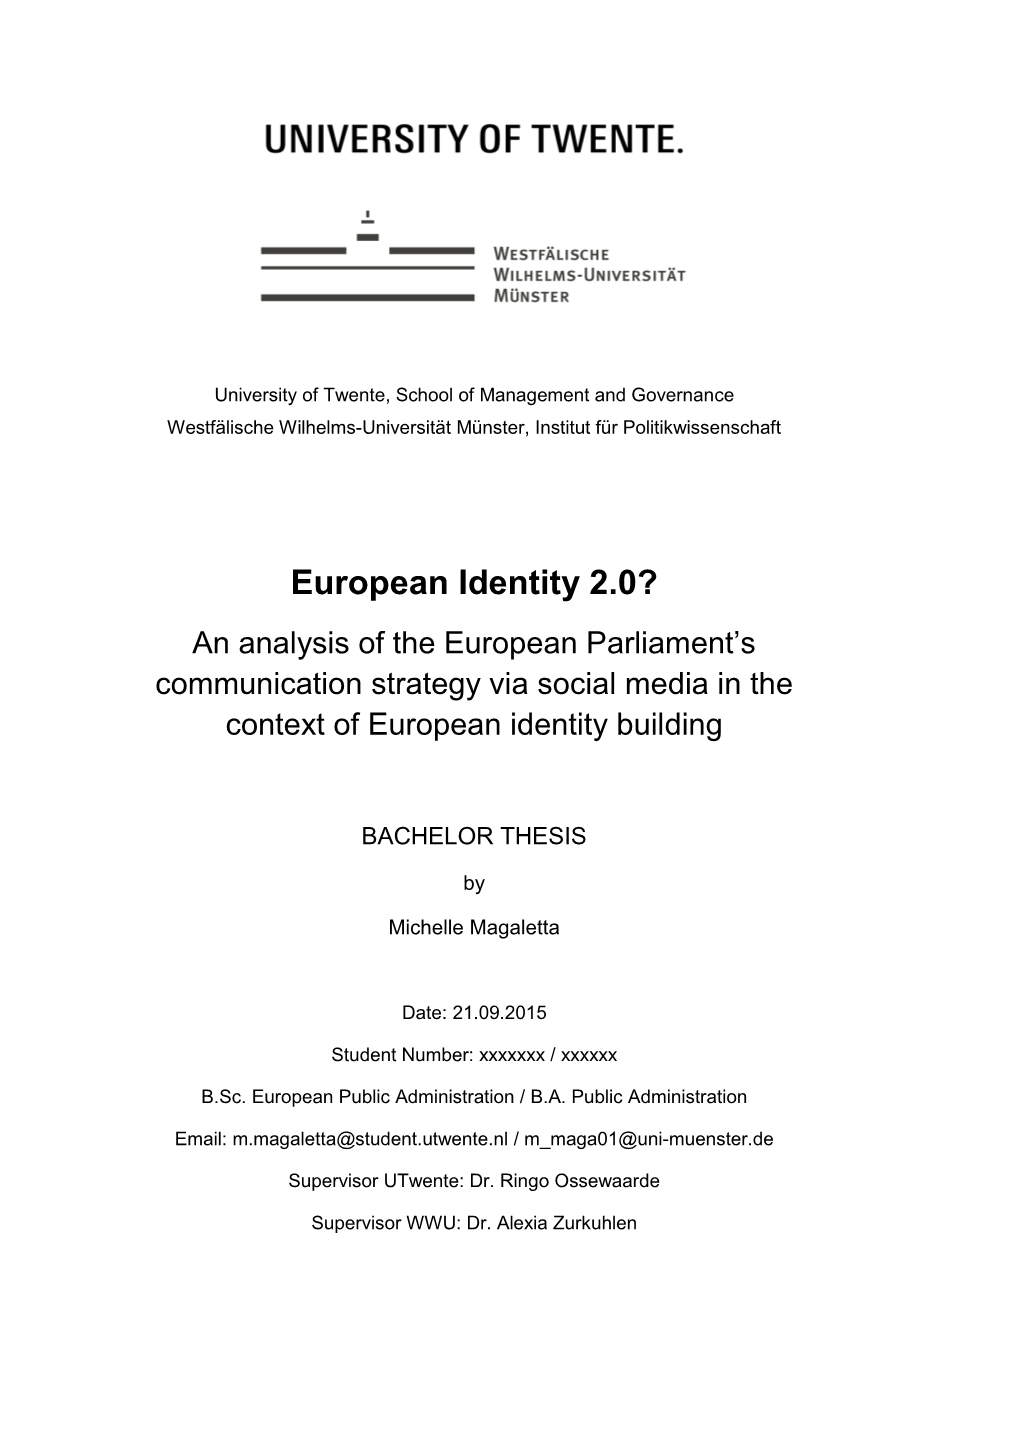 European Identity 2.0? an Analysis of the European Parliament’S Communication Strategy Via Social Media in the Context of European Identity Building